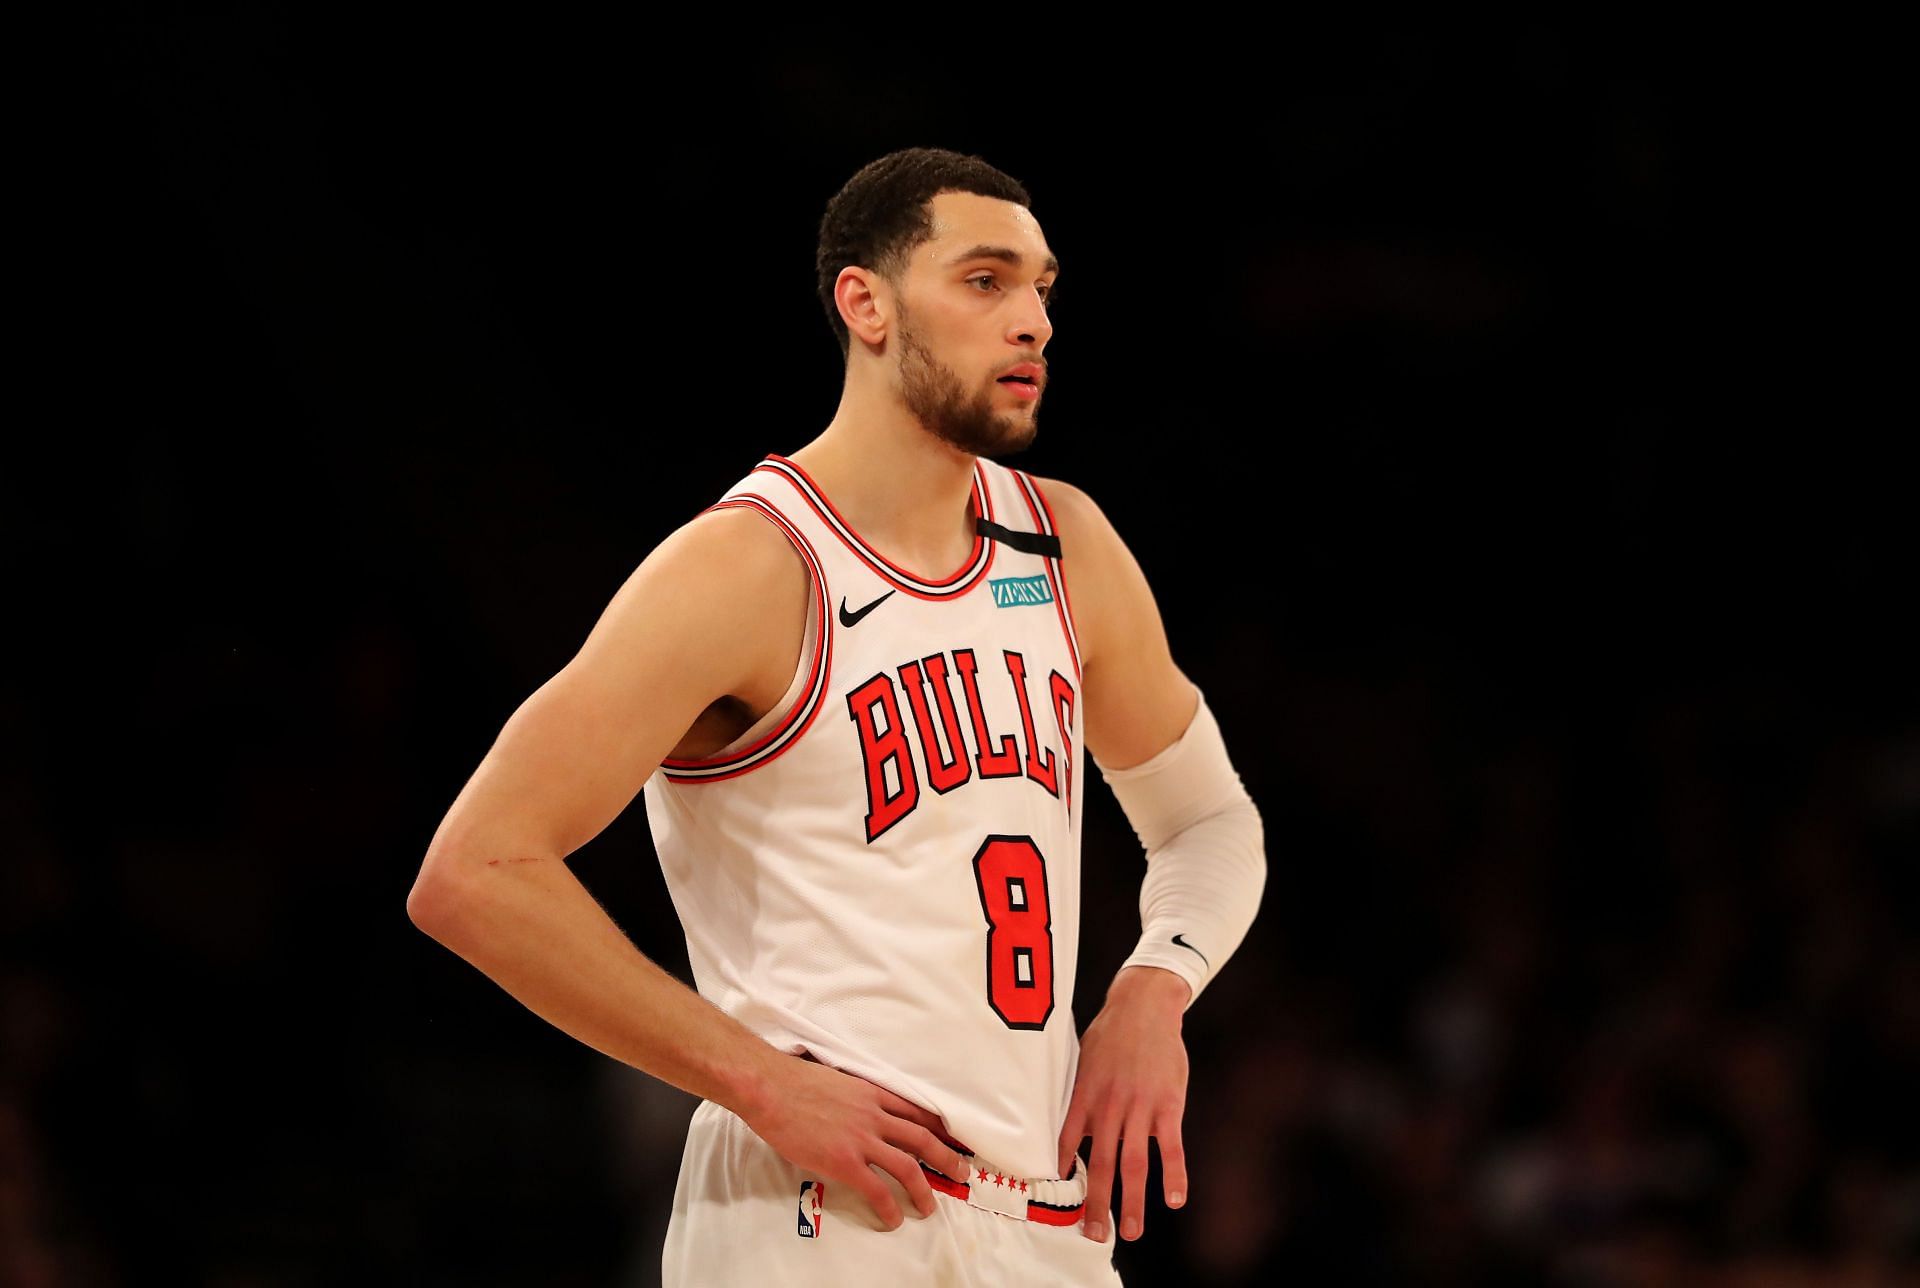 LaVine is the leading scorer for the Bulls lineup.